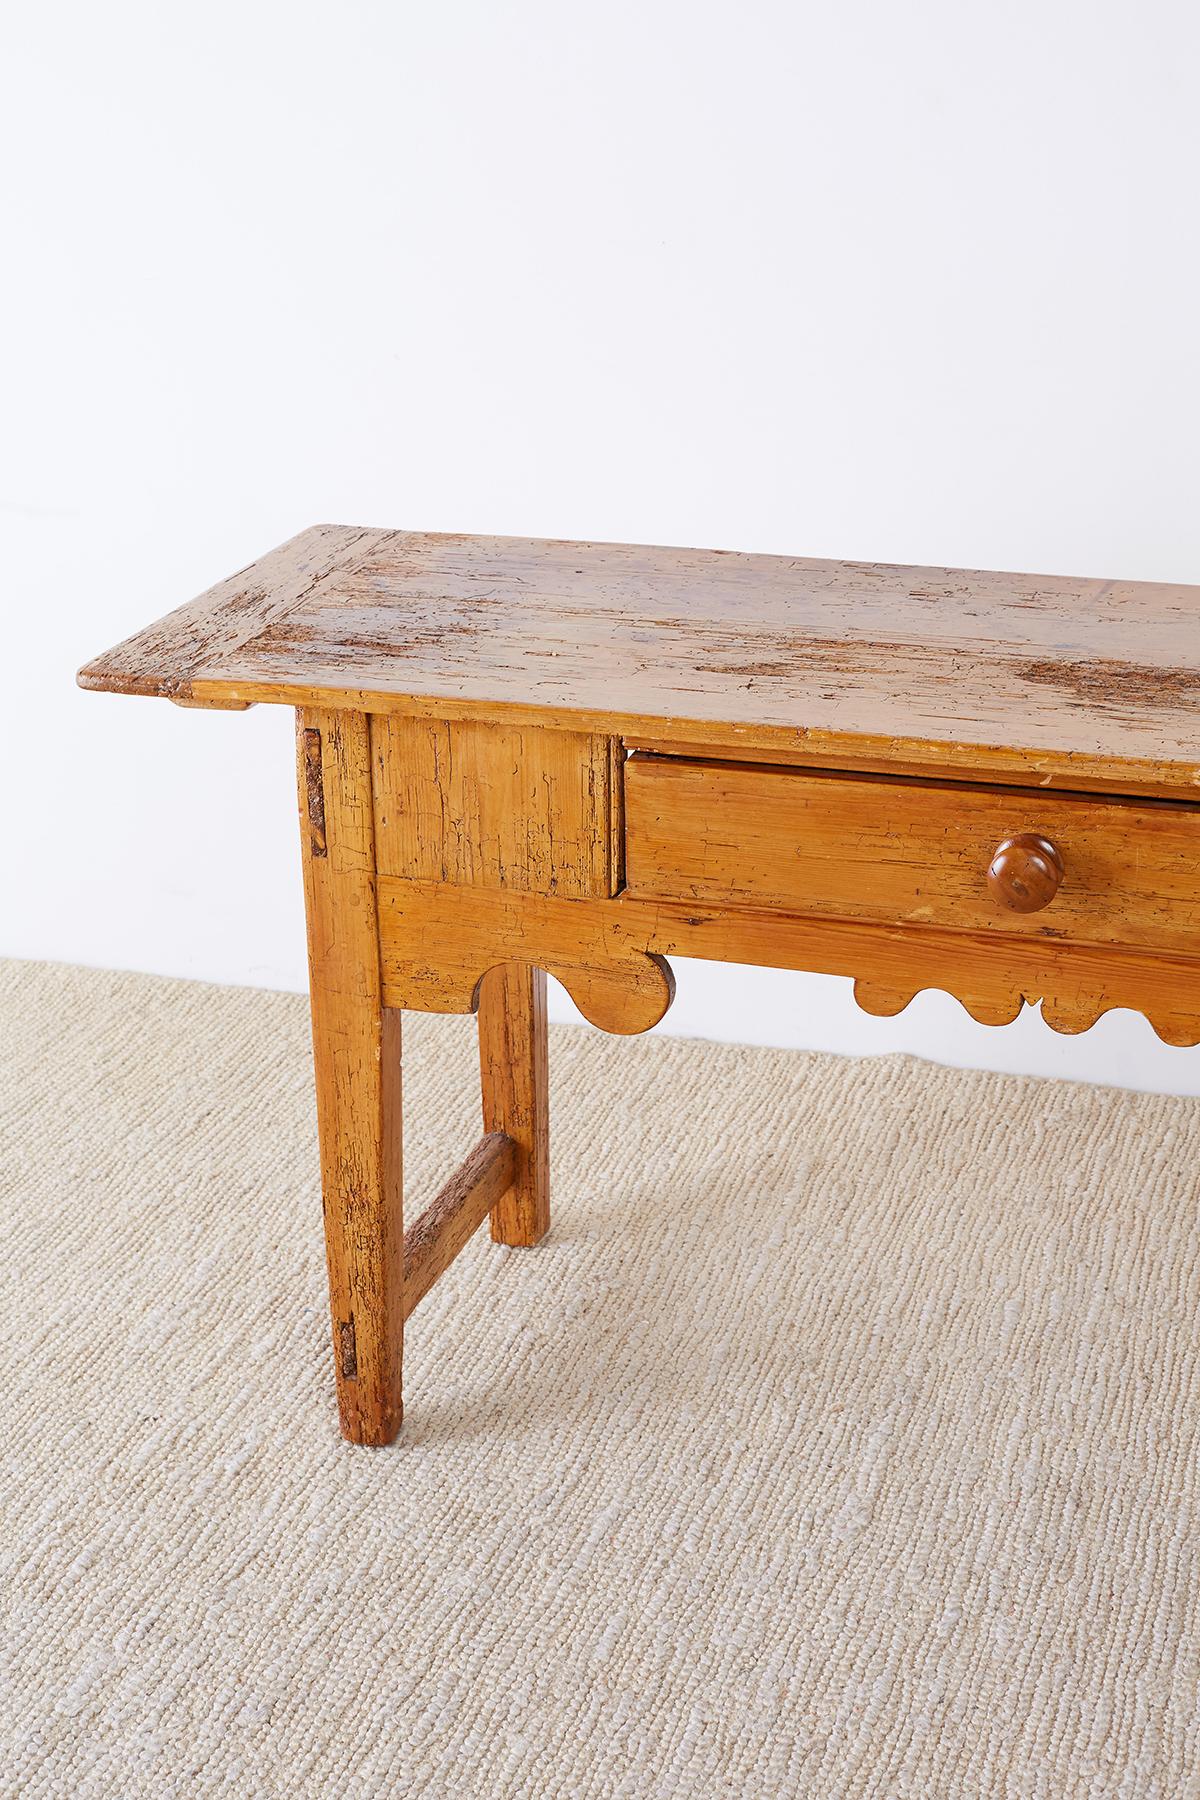 Hand-Crafted 18th Century Rustic Pine Farmhouse Table or Console